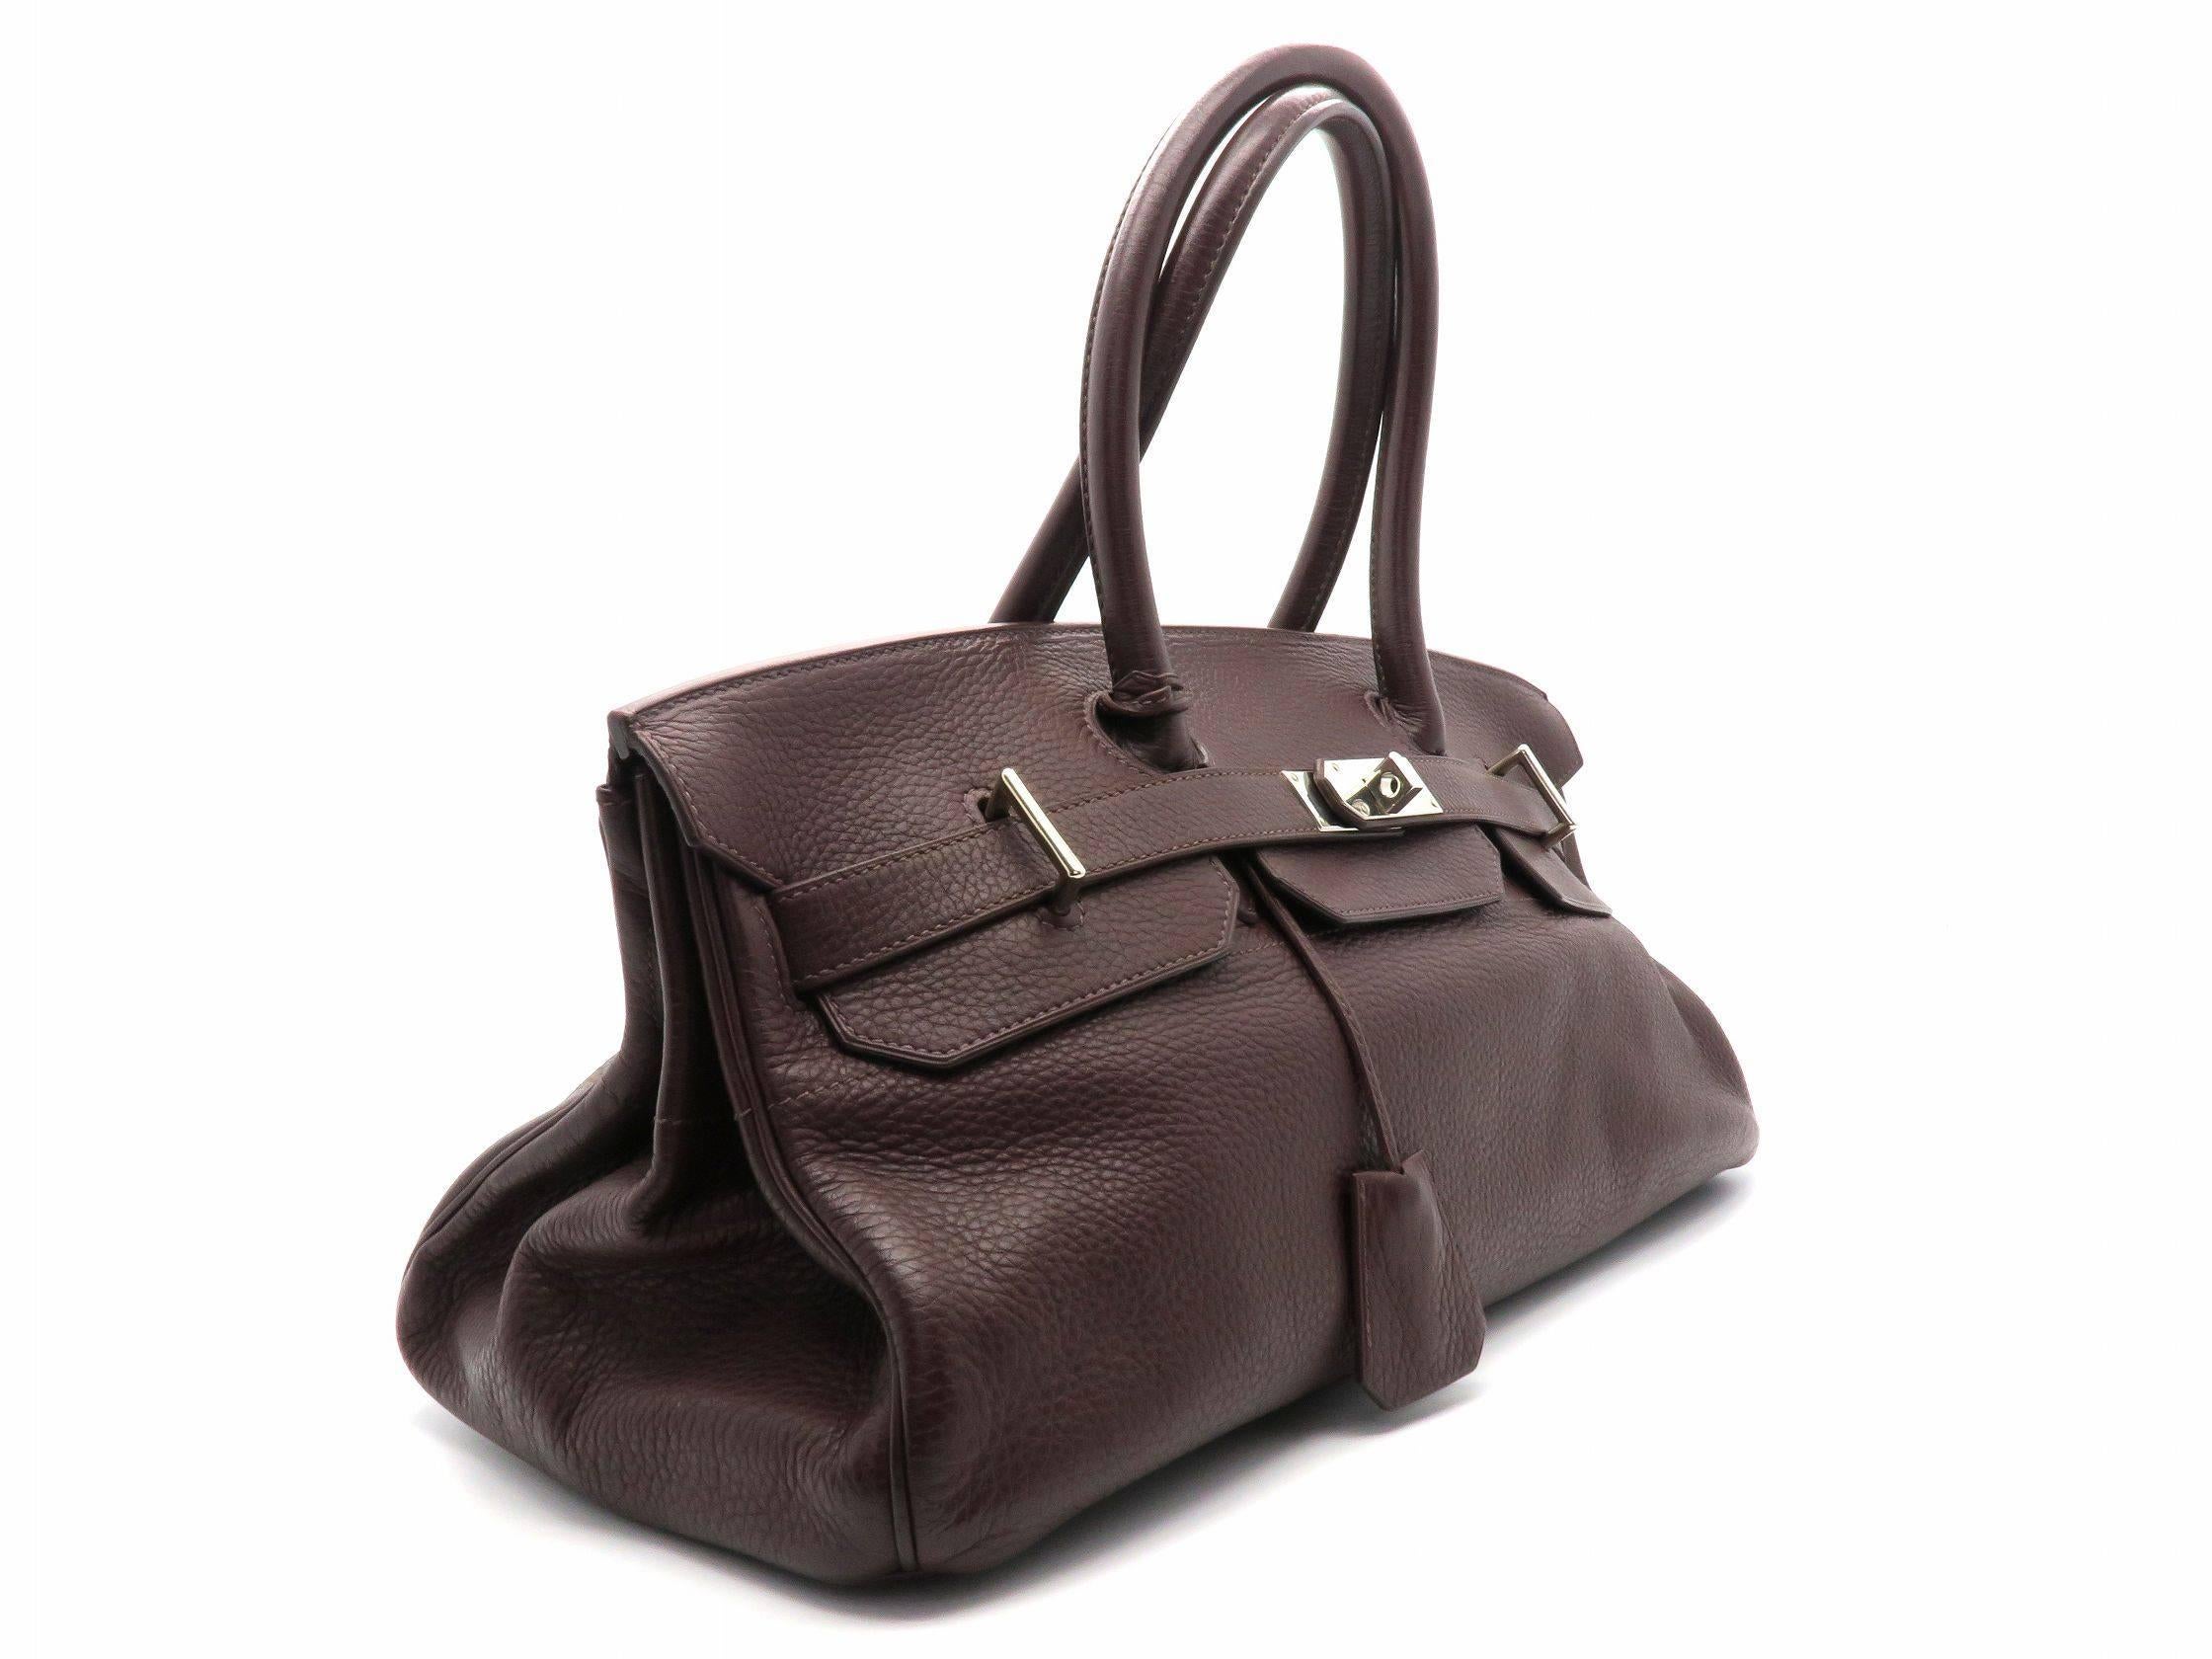 Color: Brown / Terre (designer color) 

Material: Clemence Leather 

Condition: Rank B
Overall: Fair. Few defects
Surface: Minor Scratches
Corners: Obvious Scratches & Stains
Edges: Minor Scratches
Handles/Straps: Obvious Scratches &